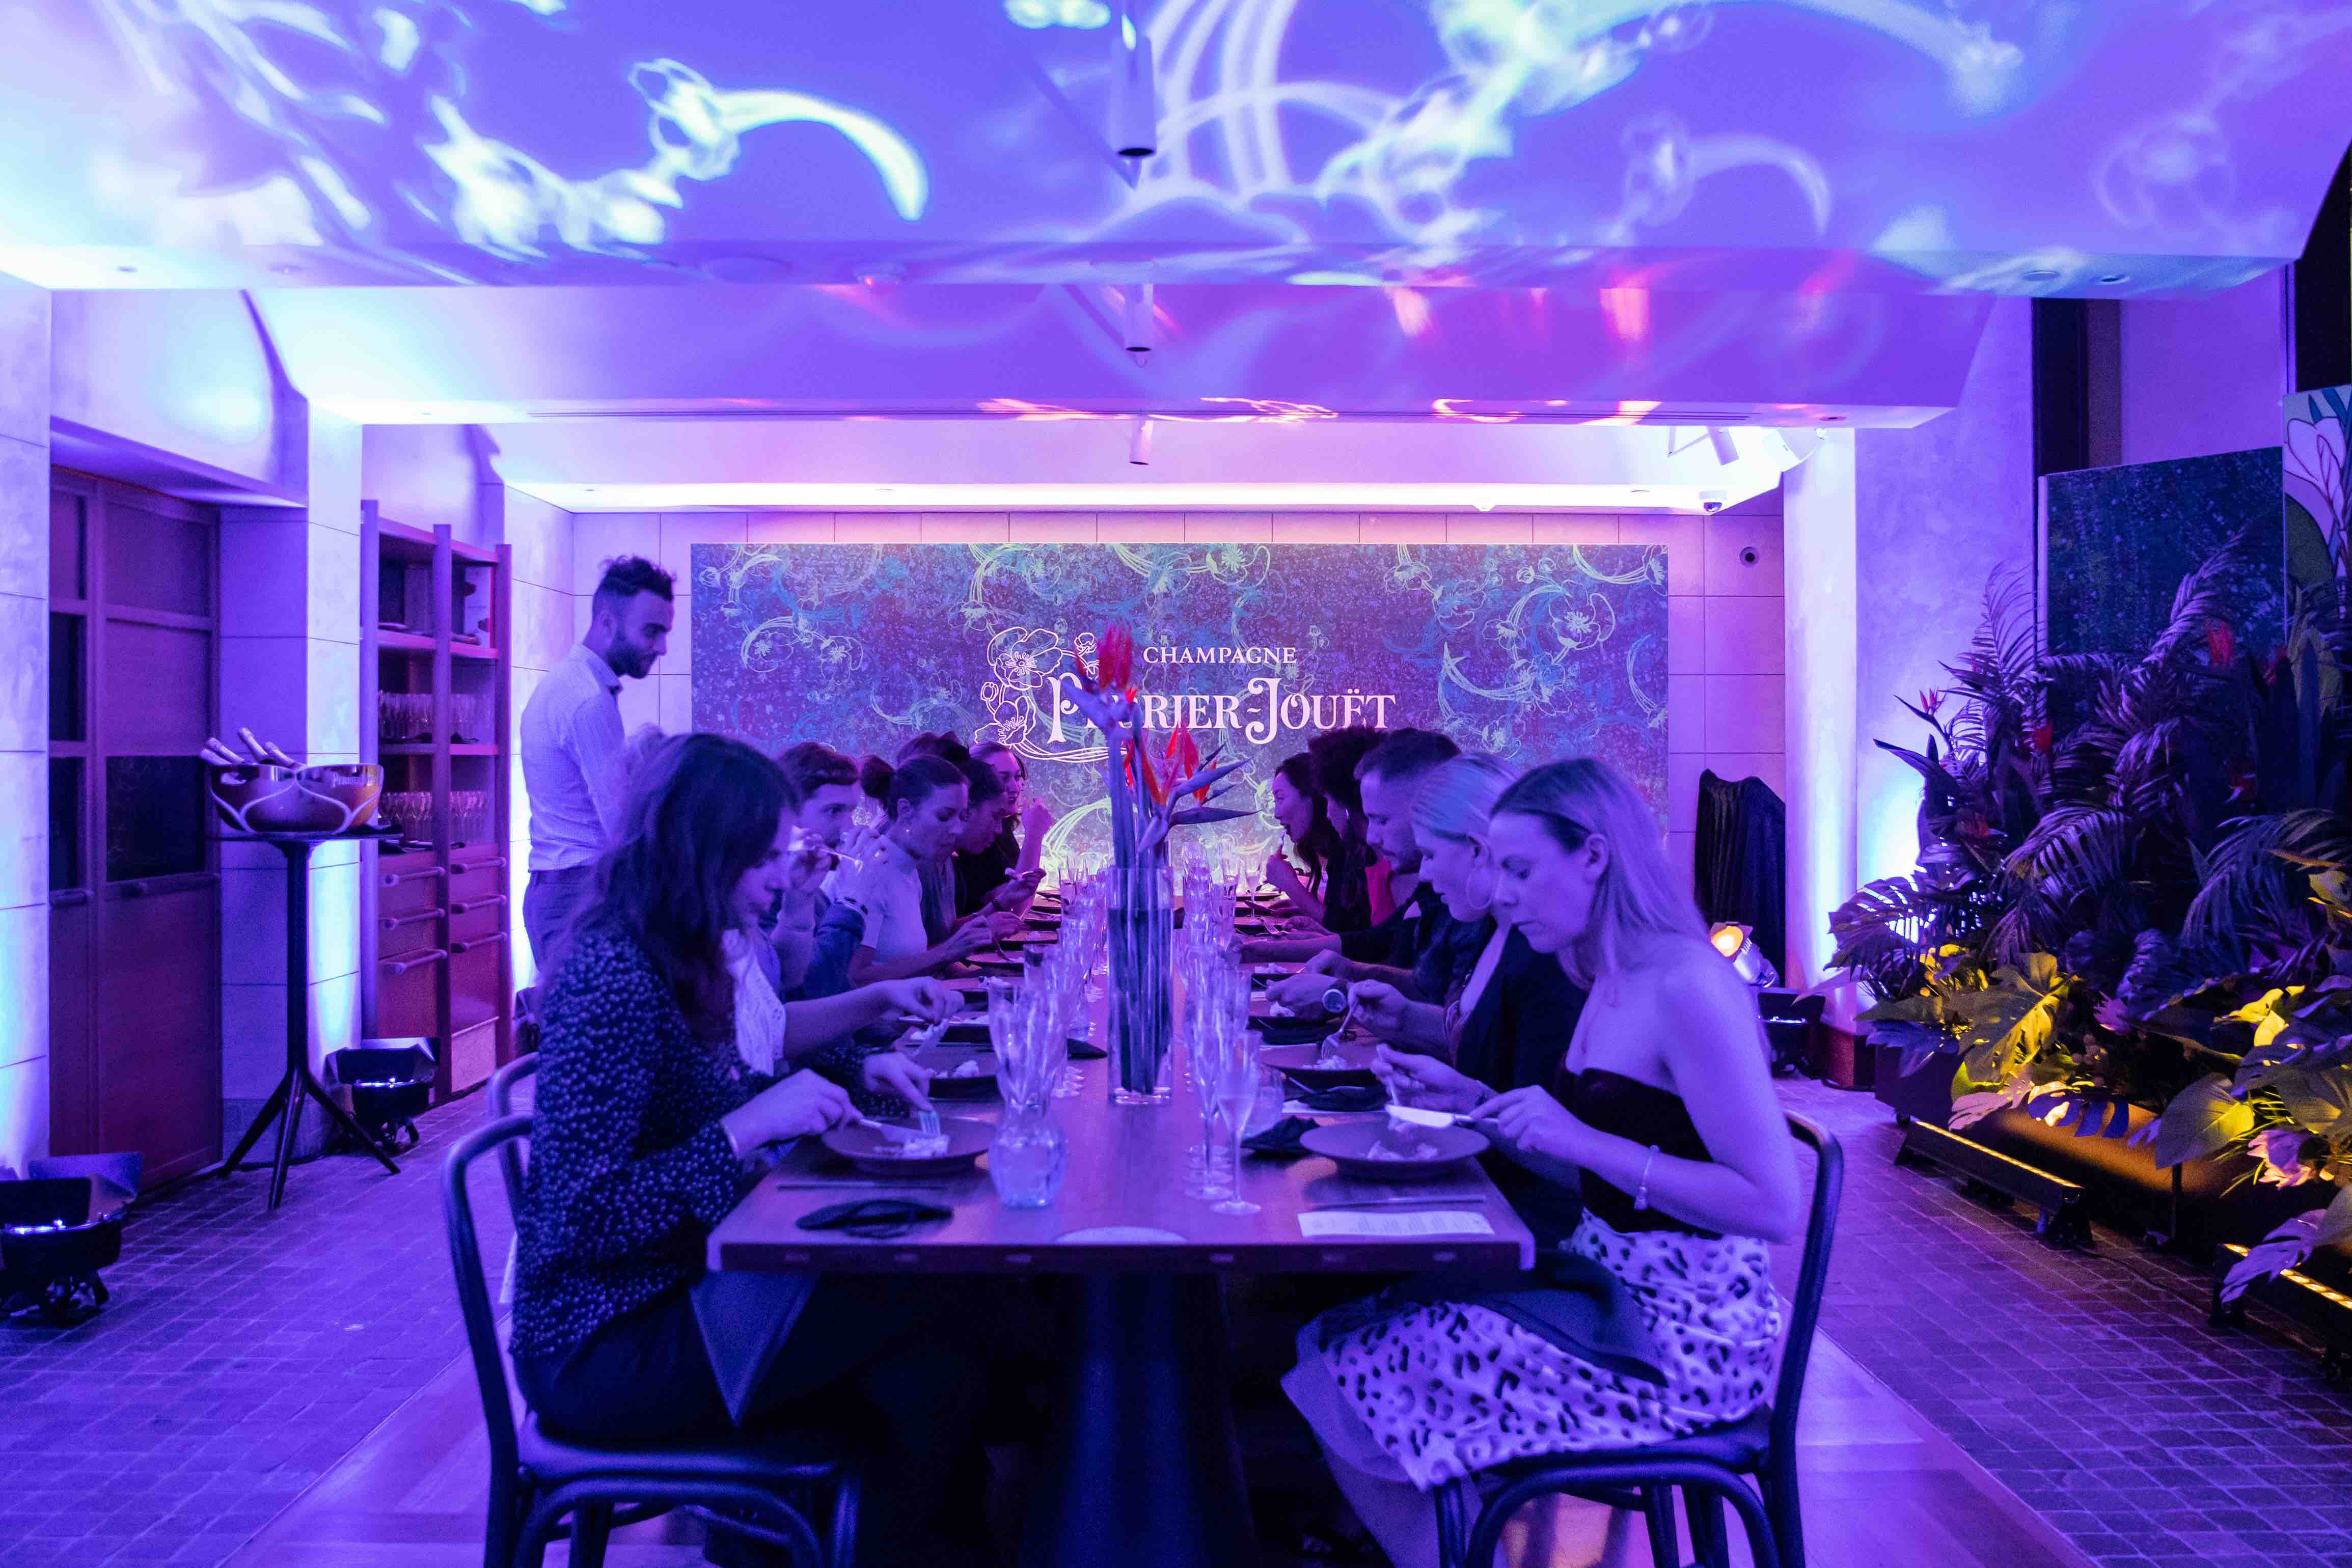 Vivid Has An Immersive And Multi-Sensory Dining Experience Which You Can’t Stay No To | Hit.com